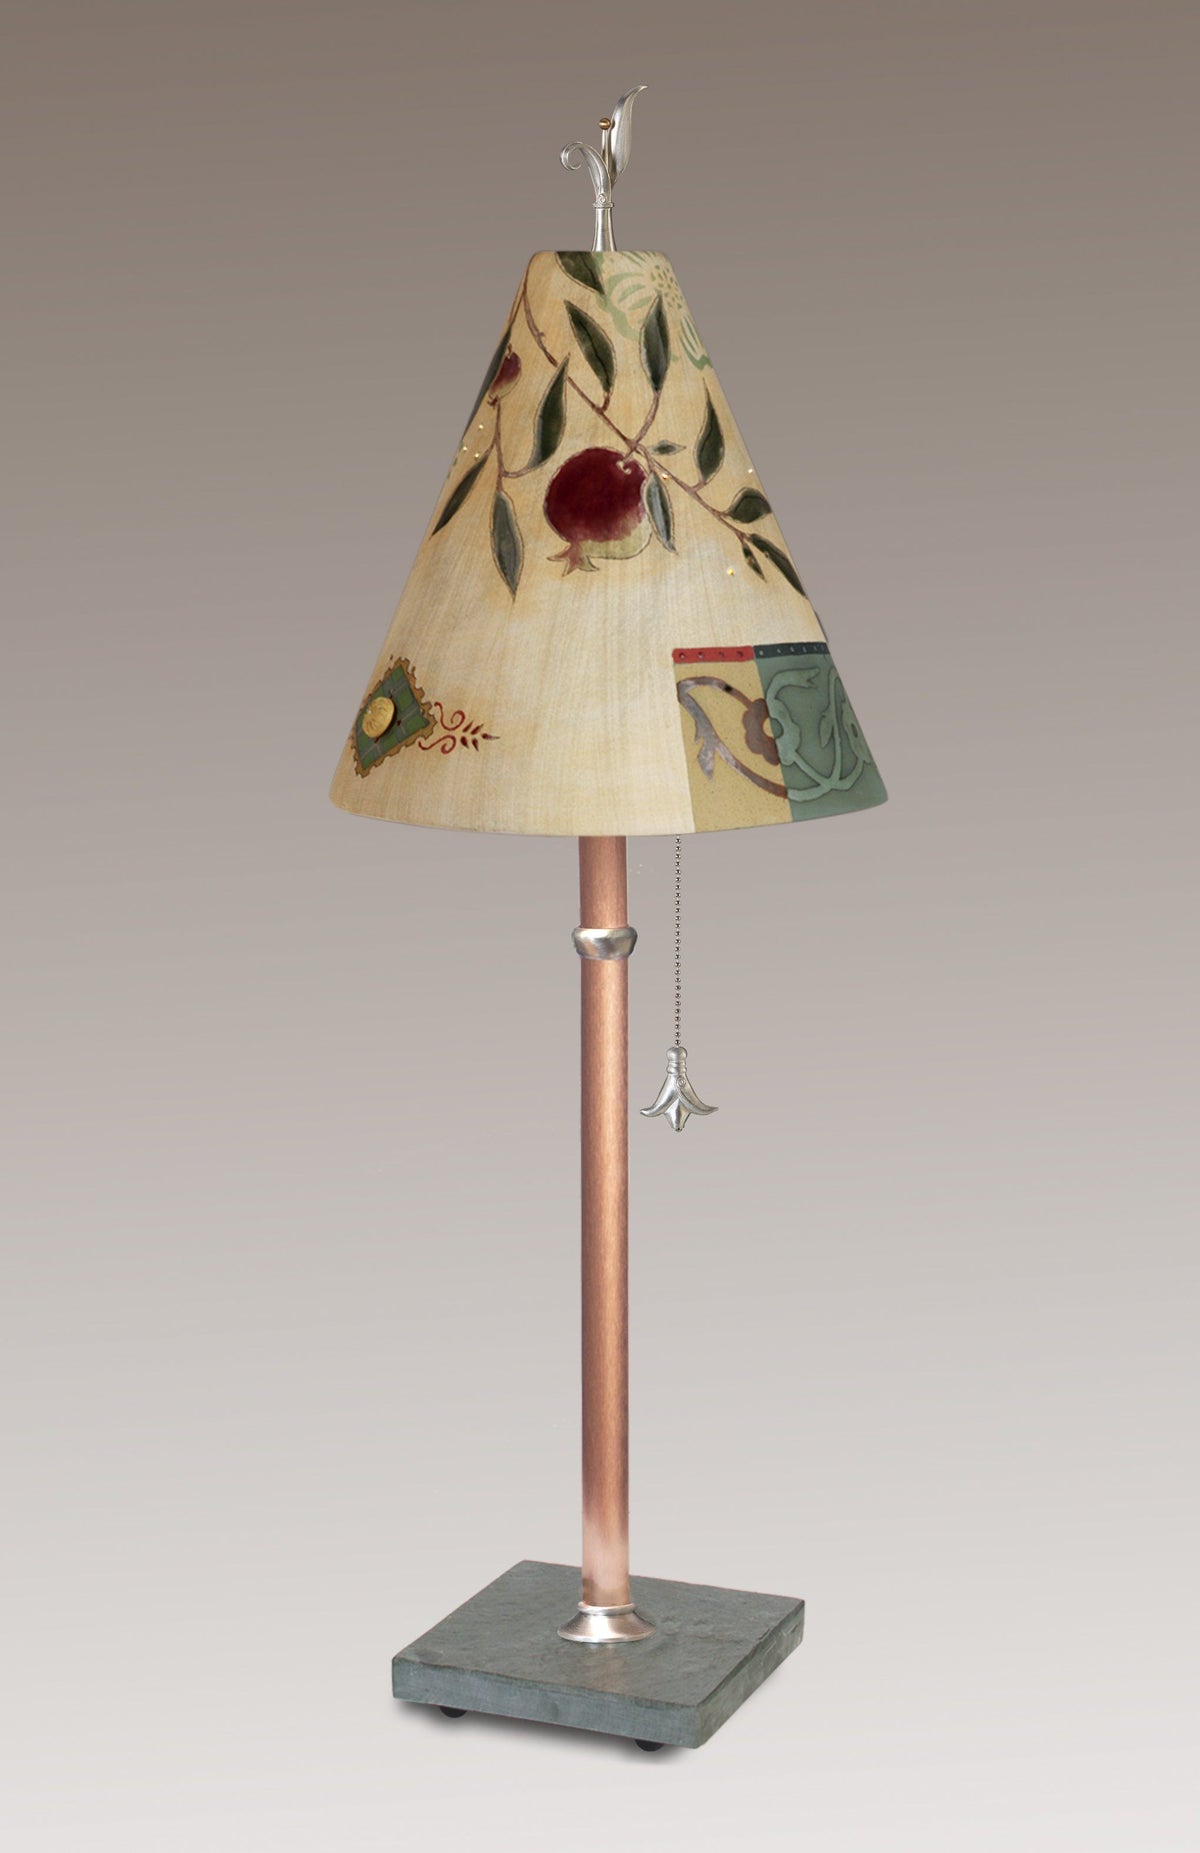 Copper Table Lamp with Small Conical Ceramic Shade in Pomegranate Ribbon